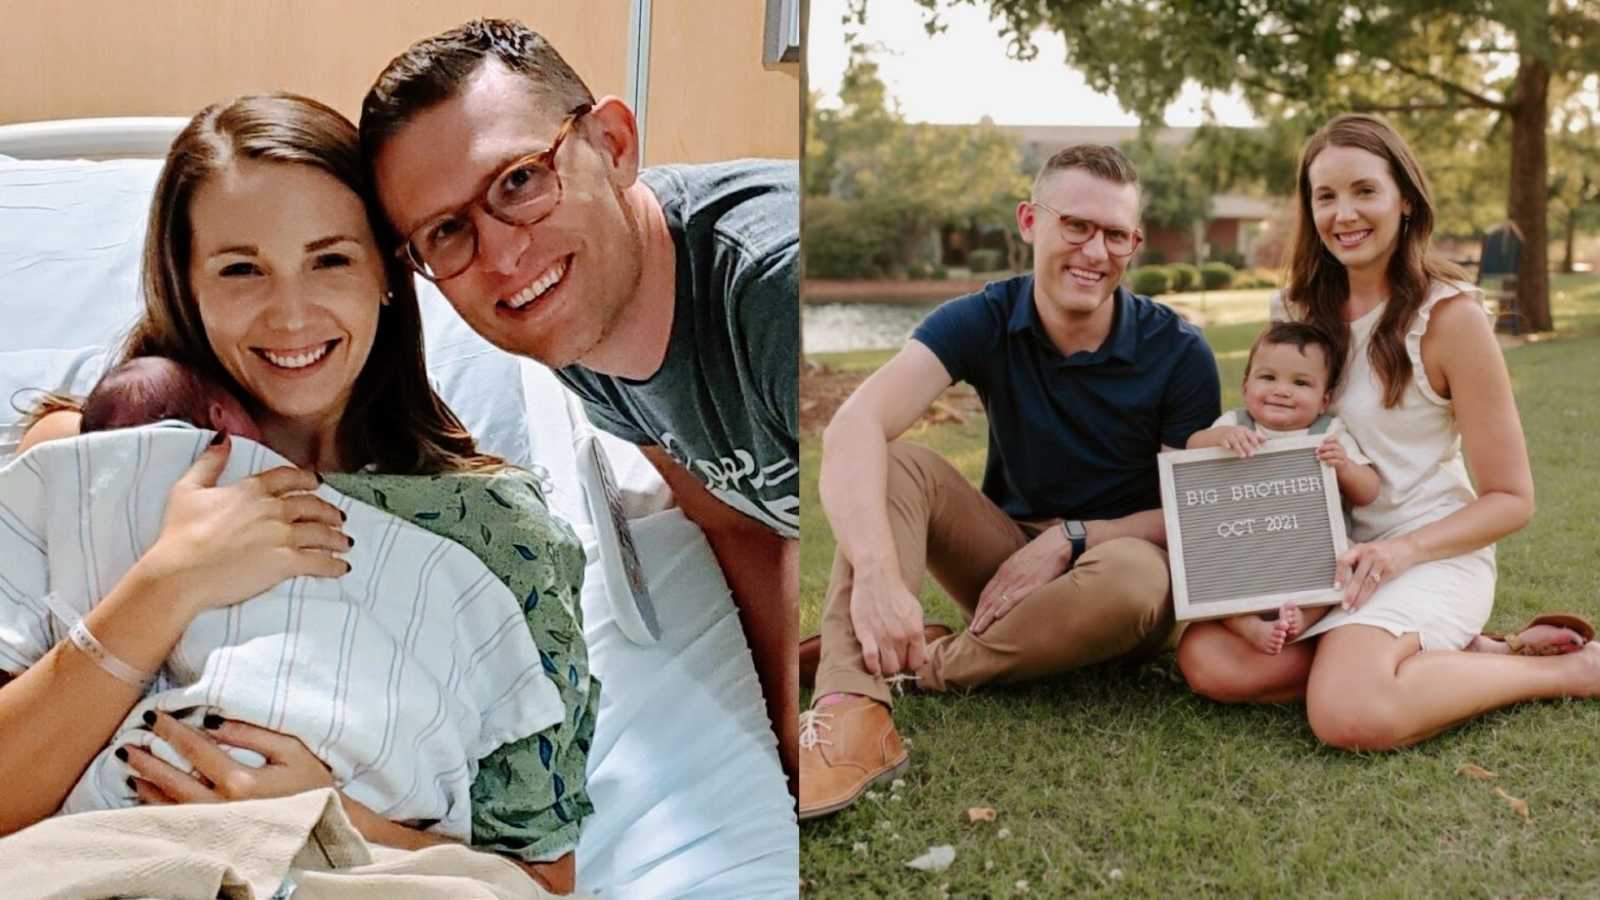 On the left, couple take photo in hospital with their newborn adopted son, on the right, same couple announce they're adopting their son's sibling